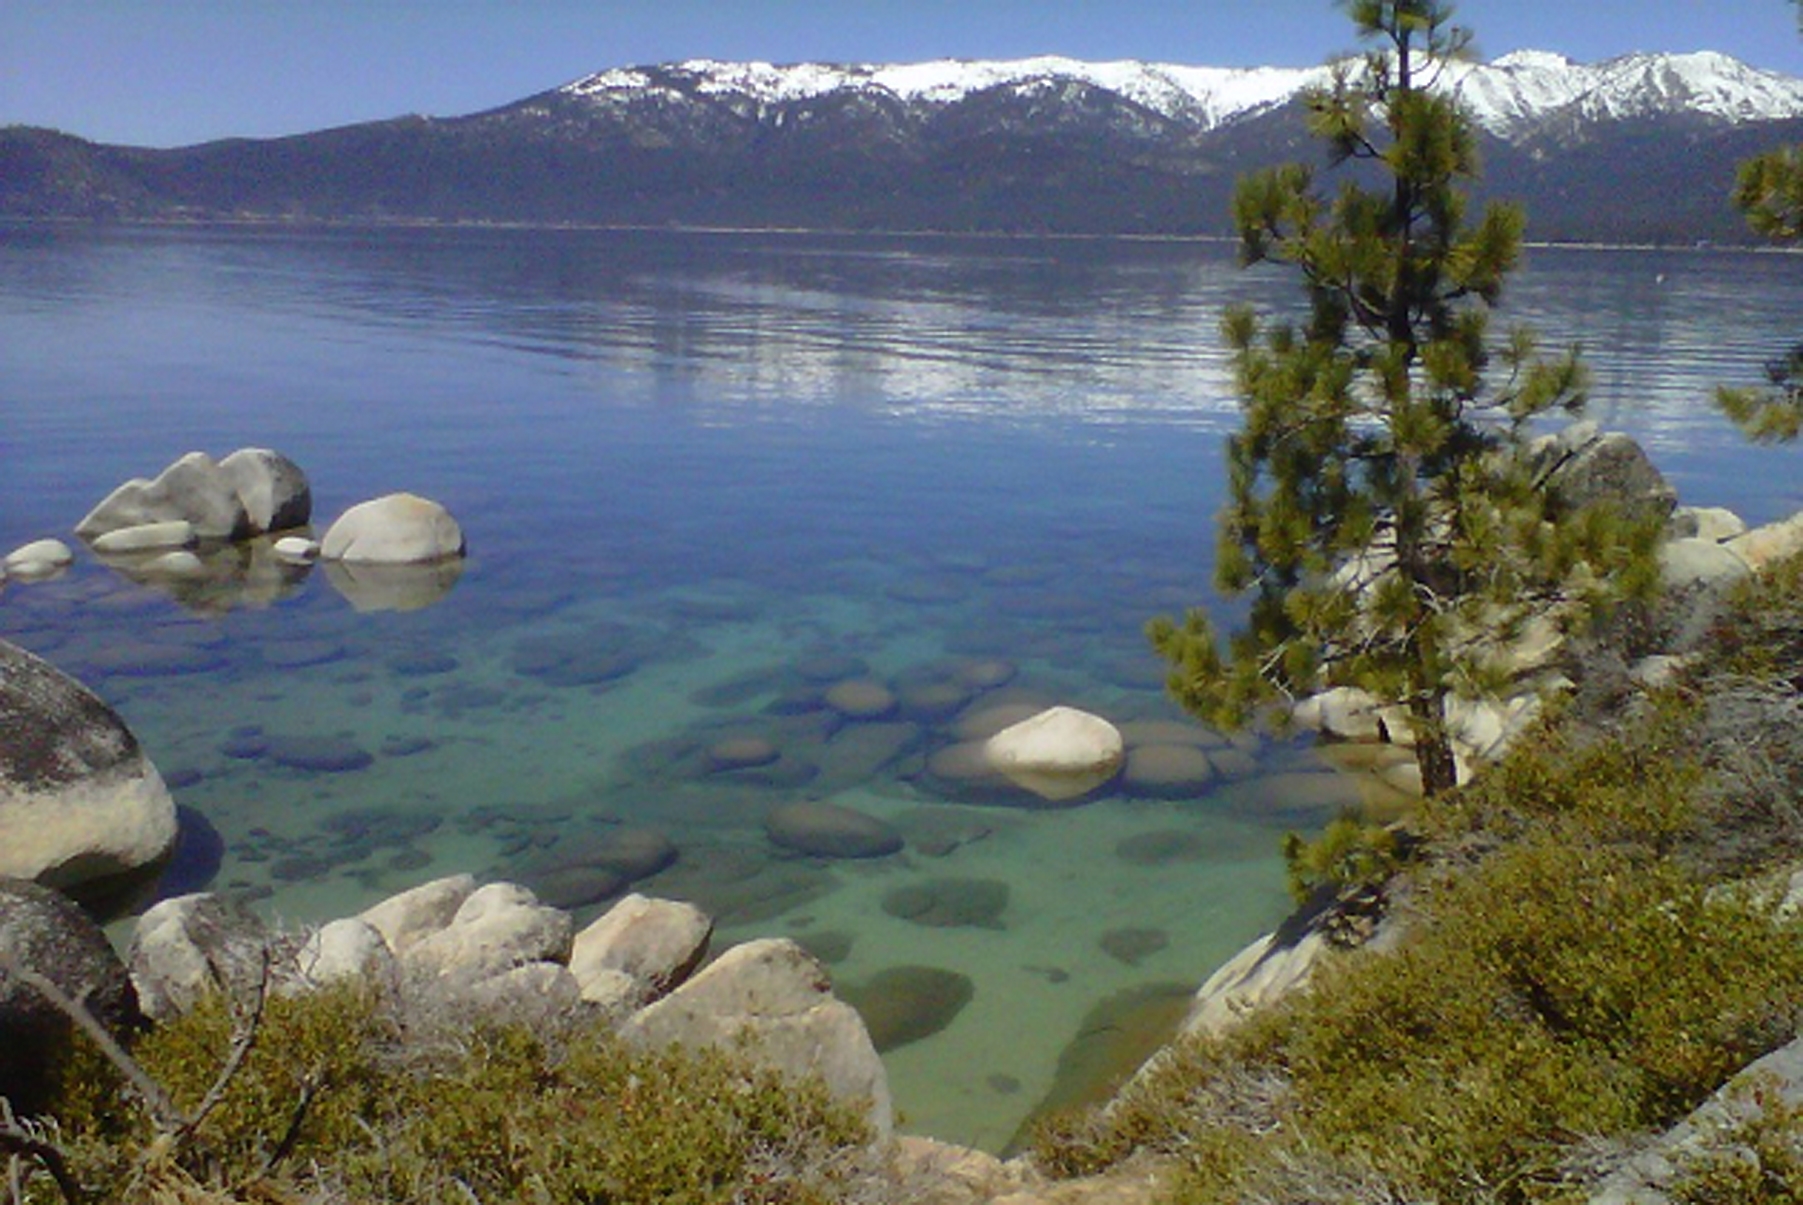 This April 12, 2012 photo shows the clarity of Lake Tahoe, Nev. Lake clarity averaged 75.3 feet in 2012, an improvement of 6.4 feet from the year before, the UC Davis Environmental Research Center said Wednesday, Feb. 27, 2013. It's the best its been since 2002 when the 10-inch white place used to measure clarity was visible as deep as 78 feet in a lake where the clarity extended more than 100 feet down in 1968. (AP Photo/Scott Sonner)